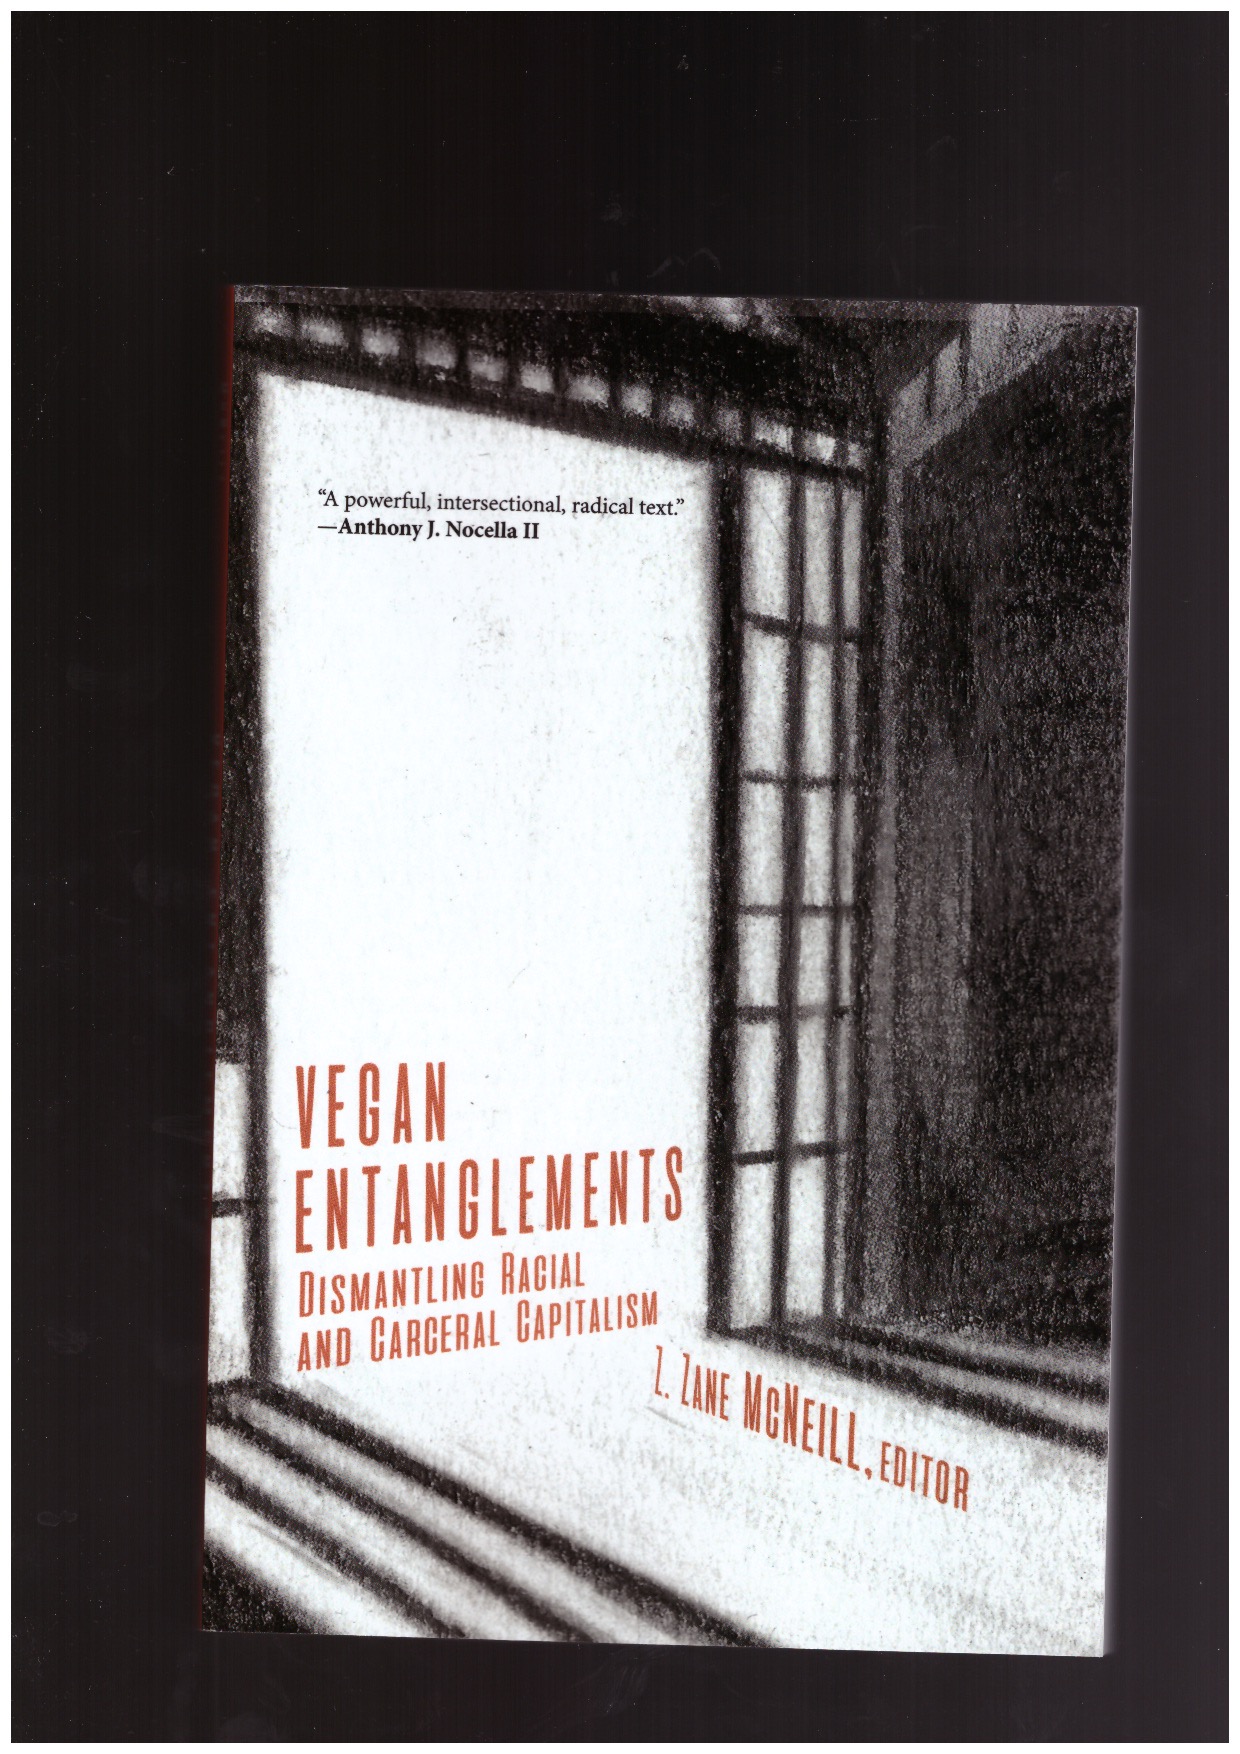 MCNEILL, Z. Zane (ed) - Vegan Entanglements: Dismantling Racial and Carceral Capitalism